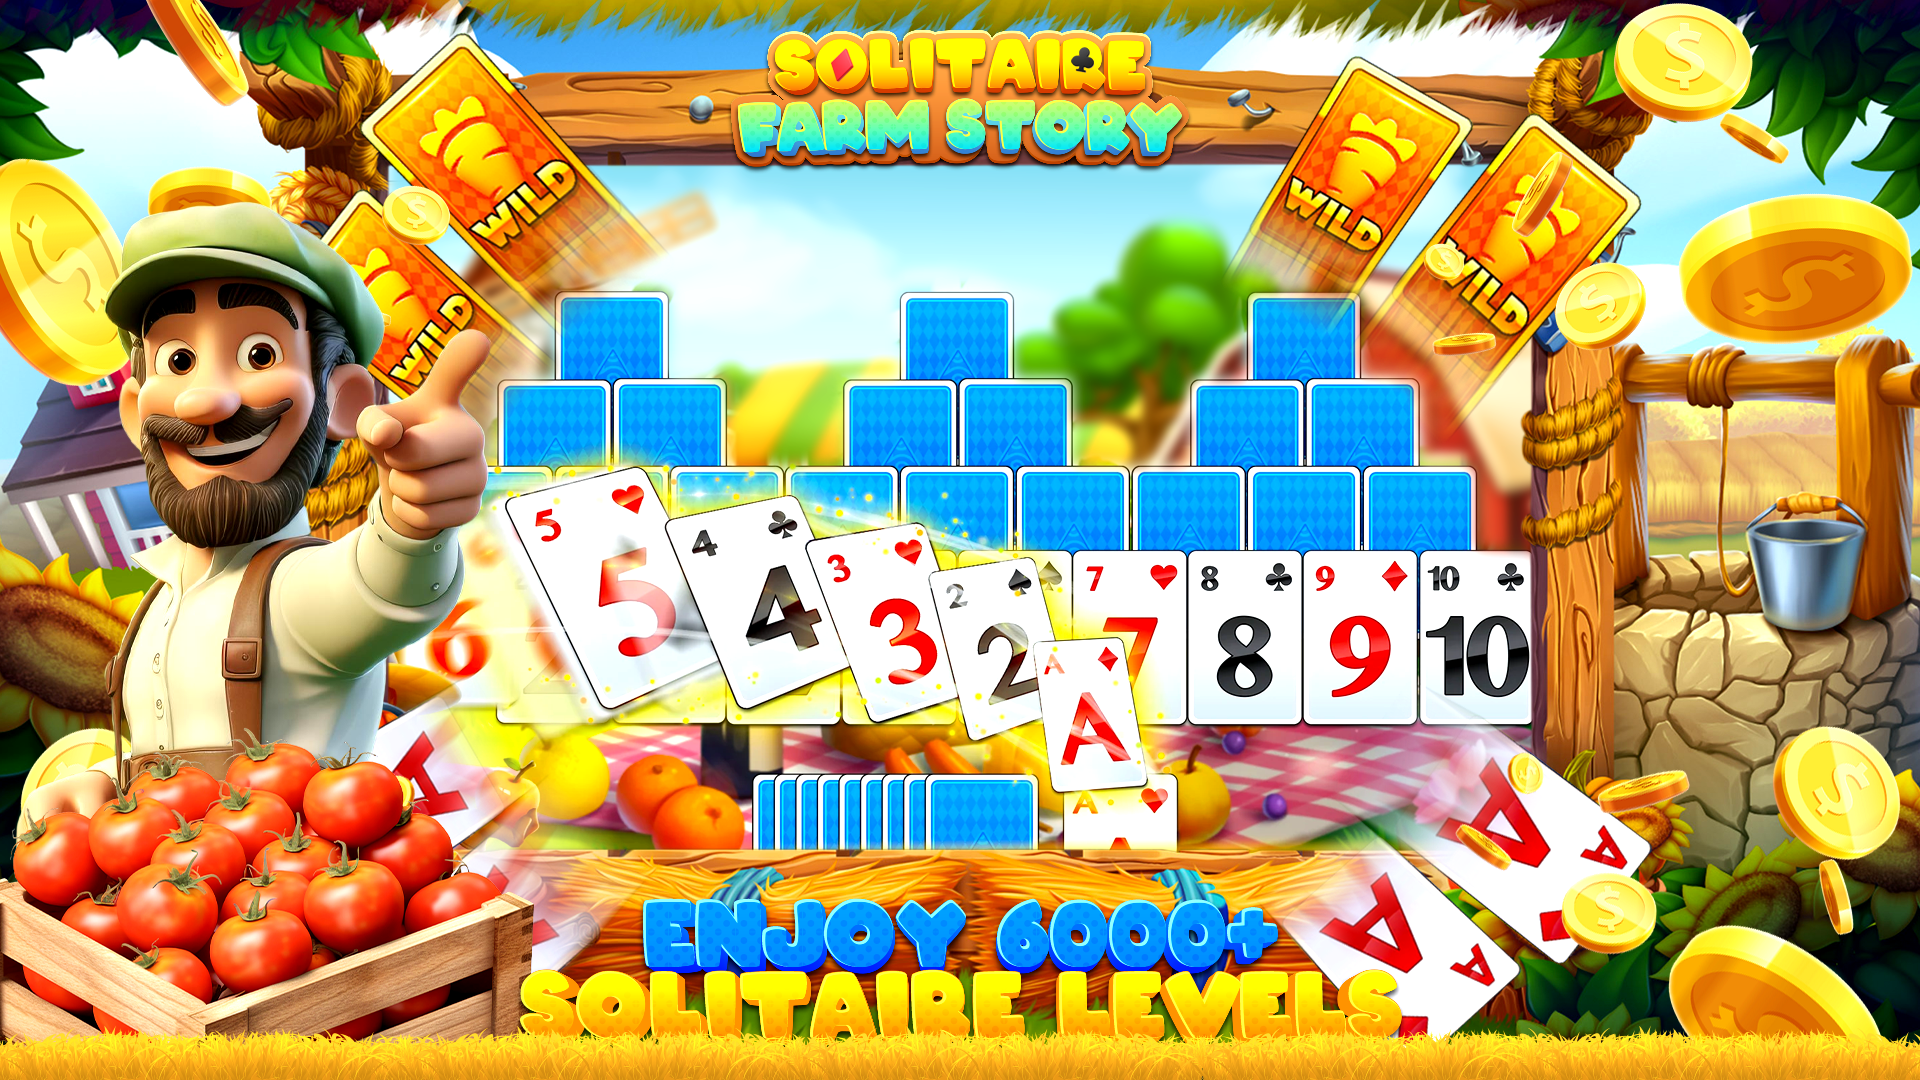 Solitaire Card Game Farm Story screenshot game